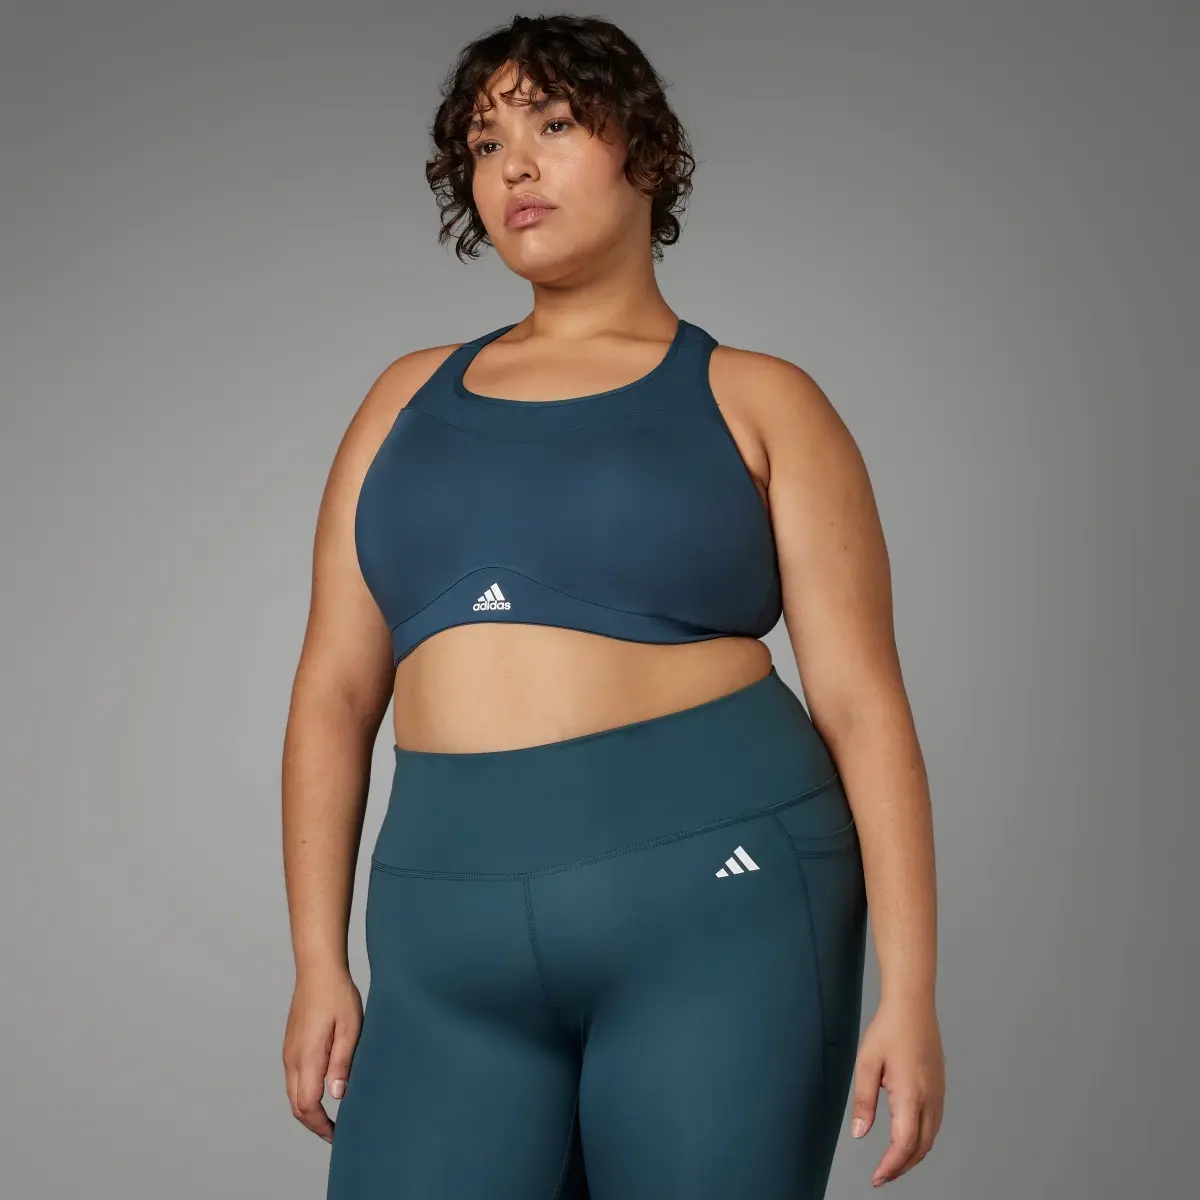 Adidas TLRD Impact Training High-Support Bra (Plus Size). 1